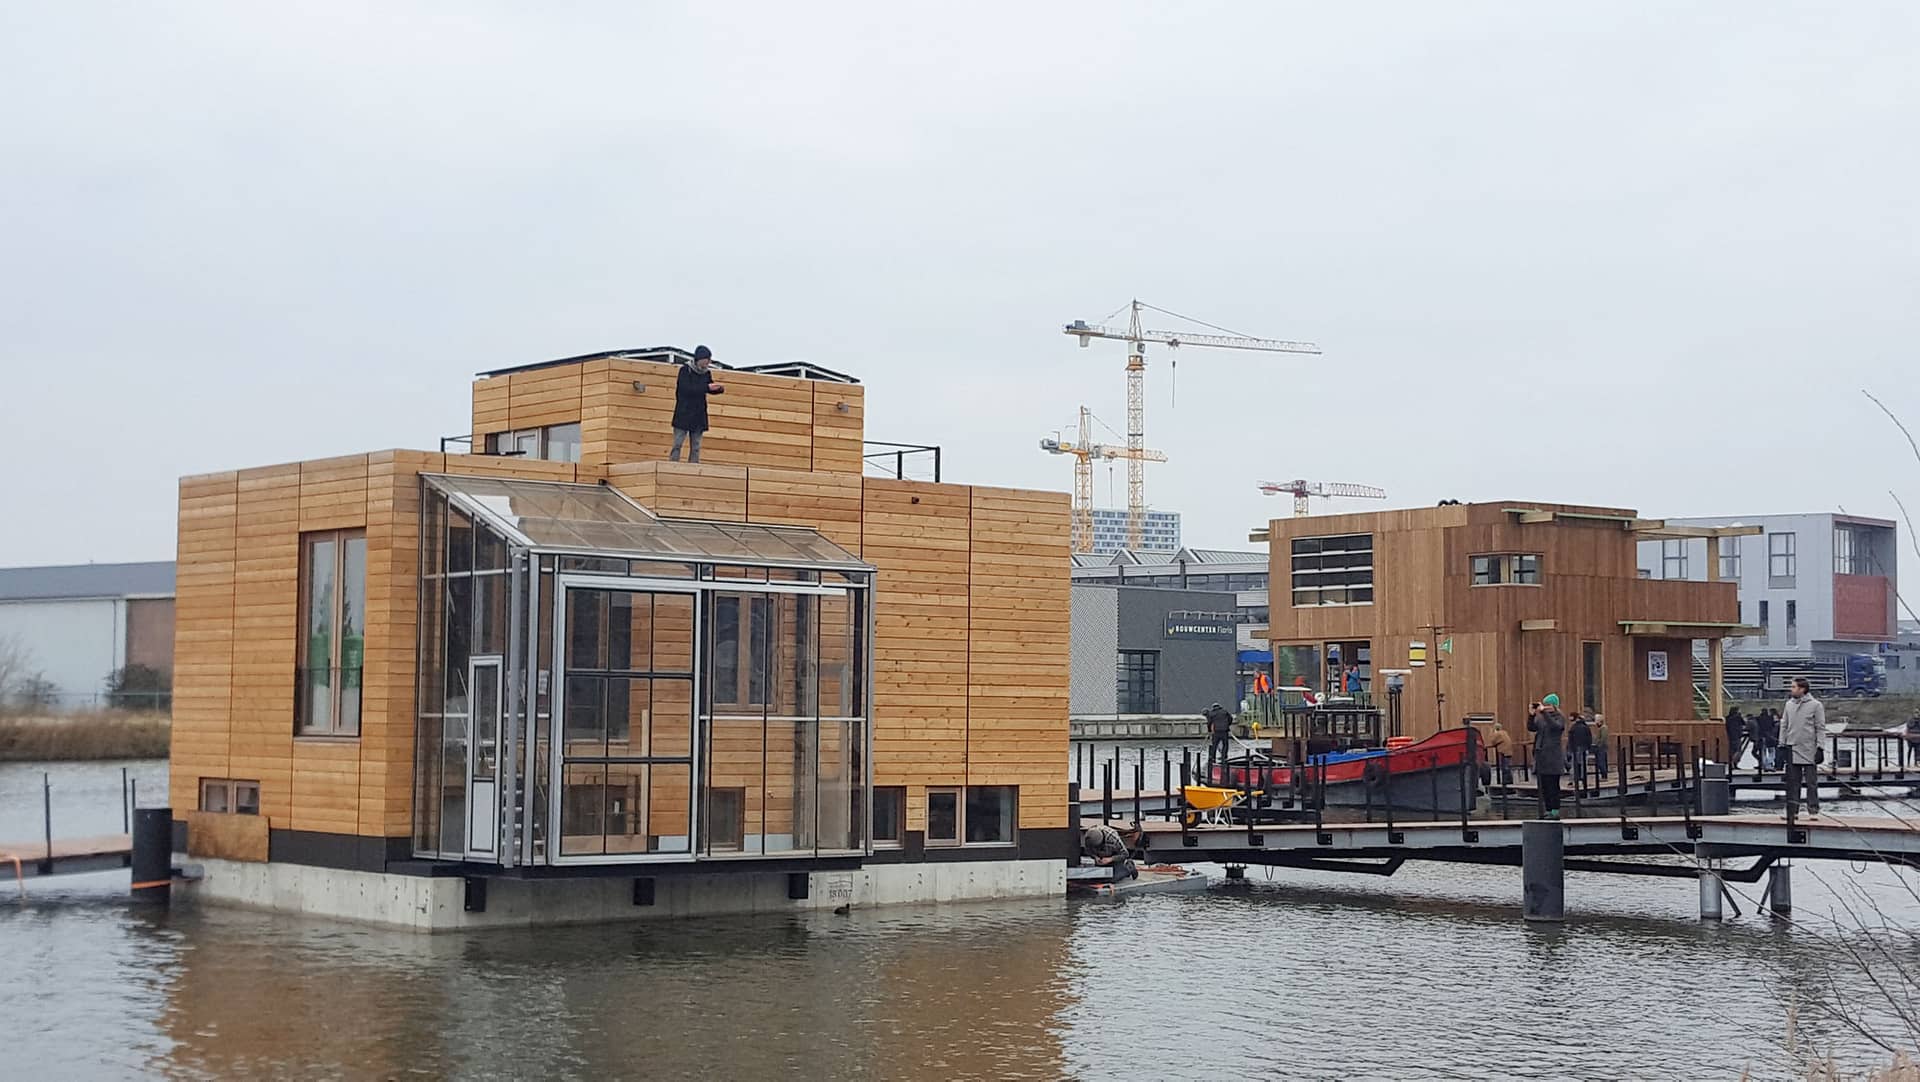 Schoonschip's houses use zero gas and are well insulated. They are designed to maximize natural sunlight, and even make the most of the water using heat pumps.